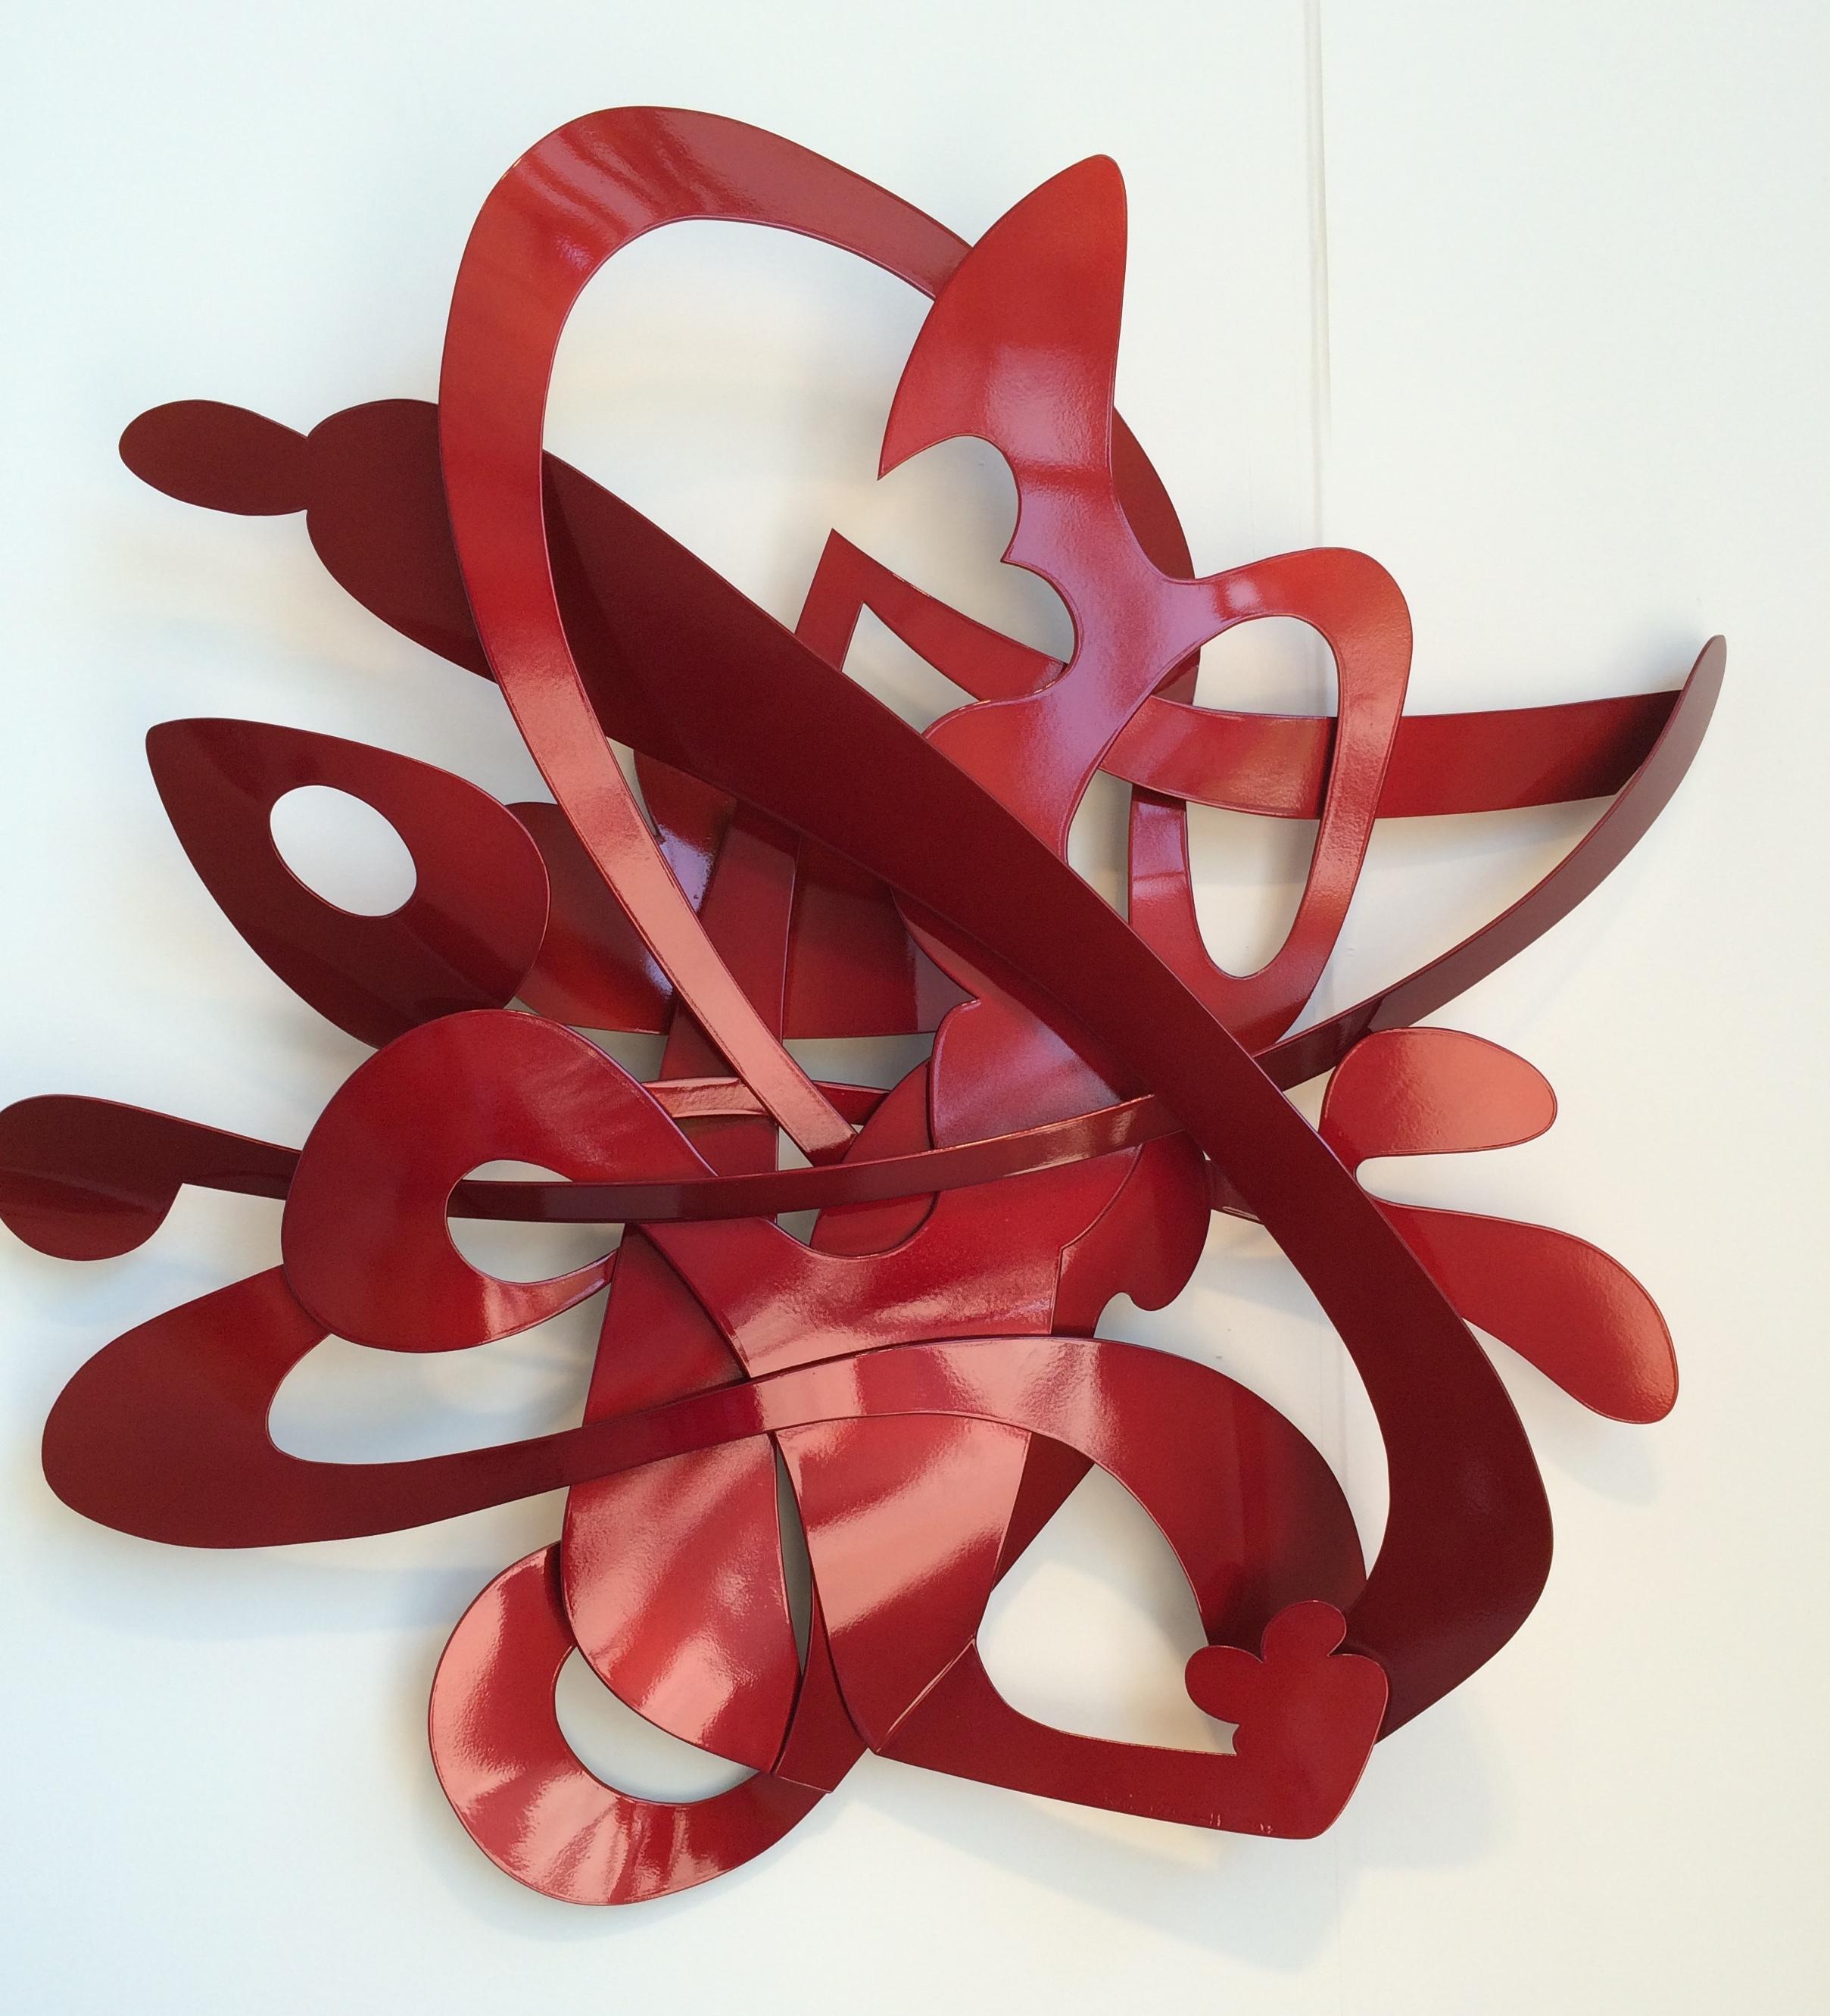 "68 Jay", Contemporary Abstract Metal Wall Relief Sculpture in Red